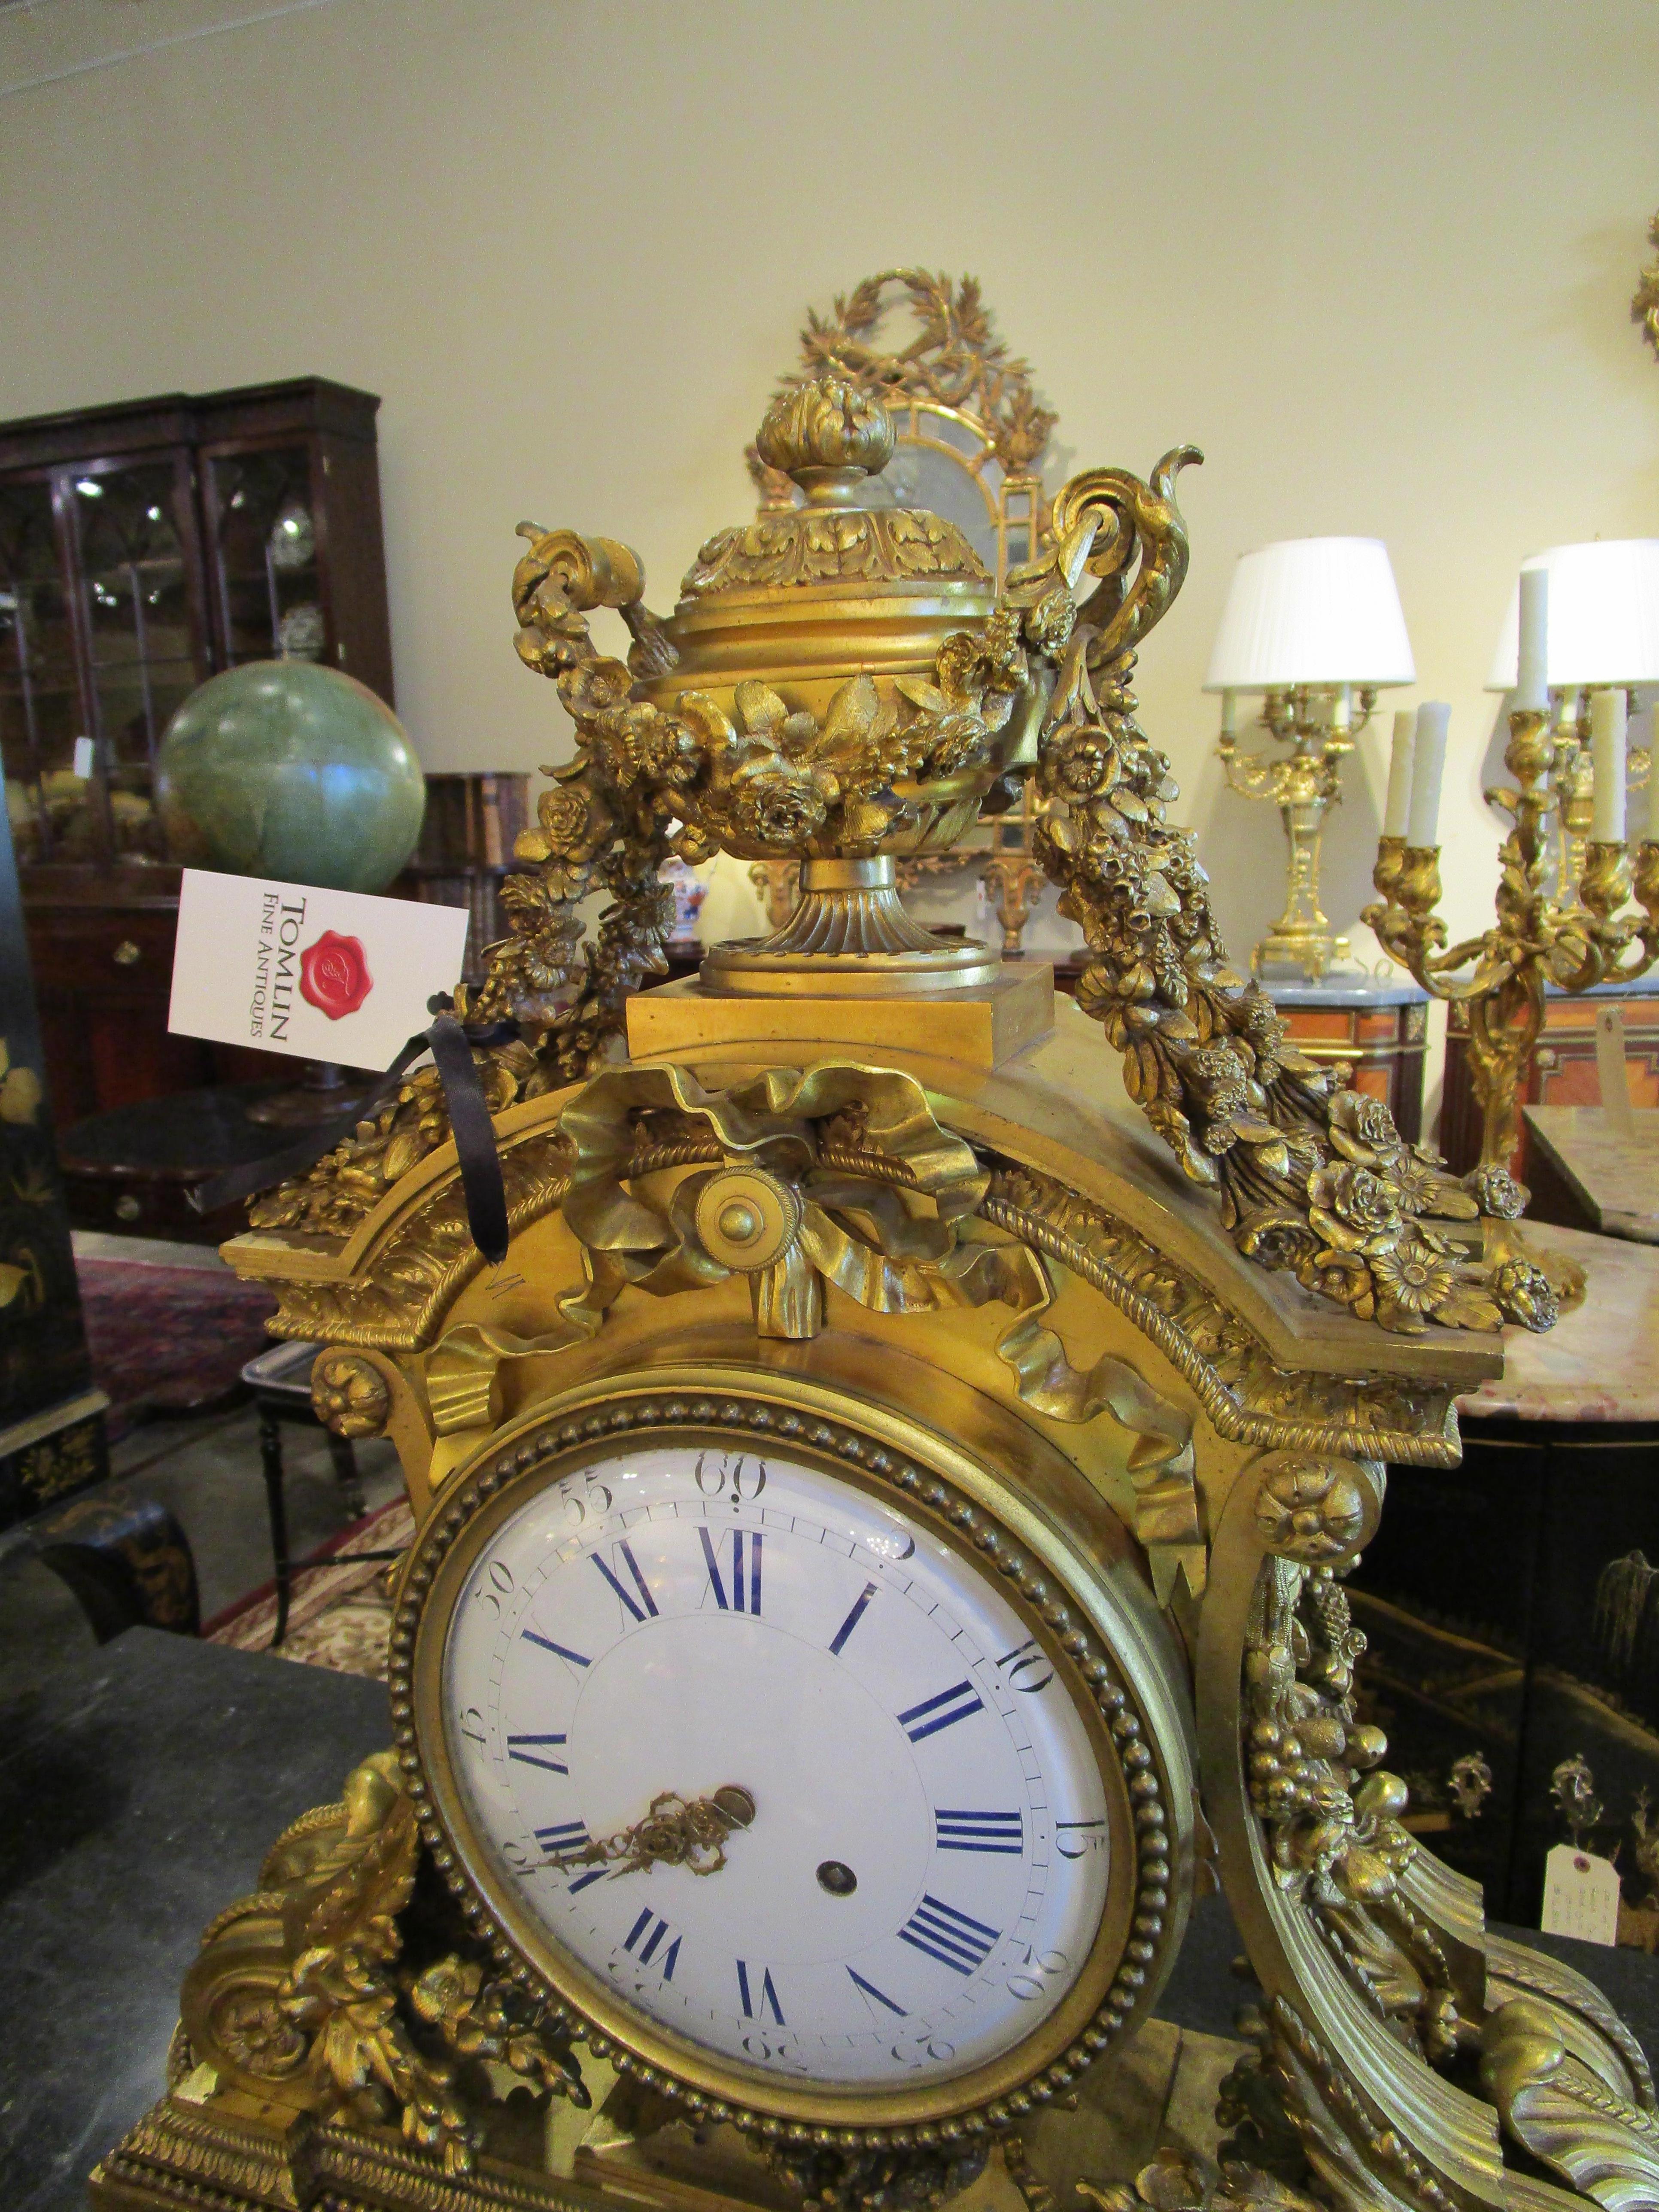 A very fine 19th century French Louis XV gilt bronze mantle clock. Beautiful condition all original and working. Signed Pitoit Paris.